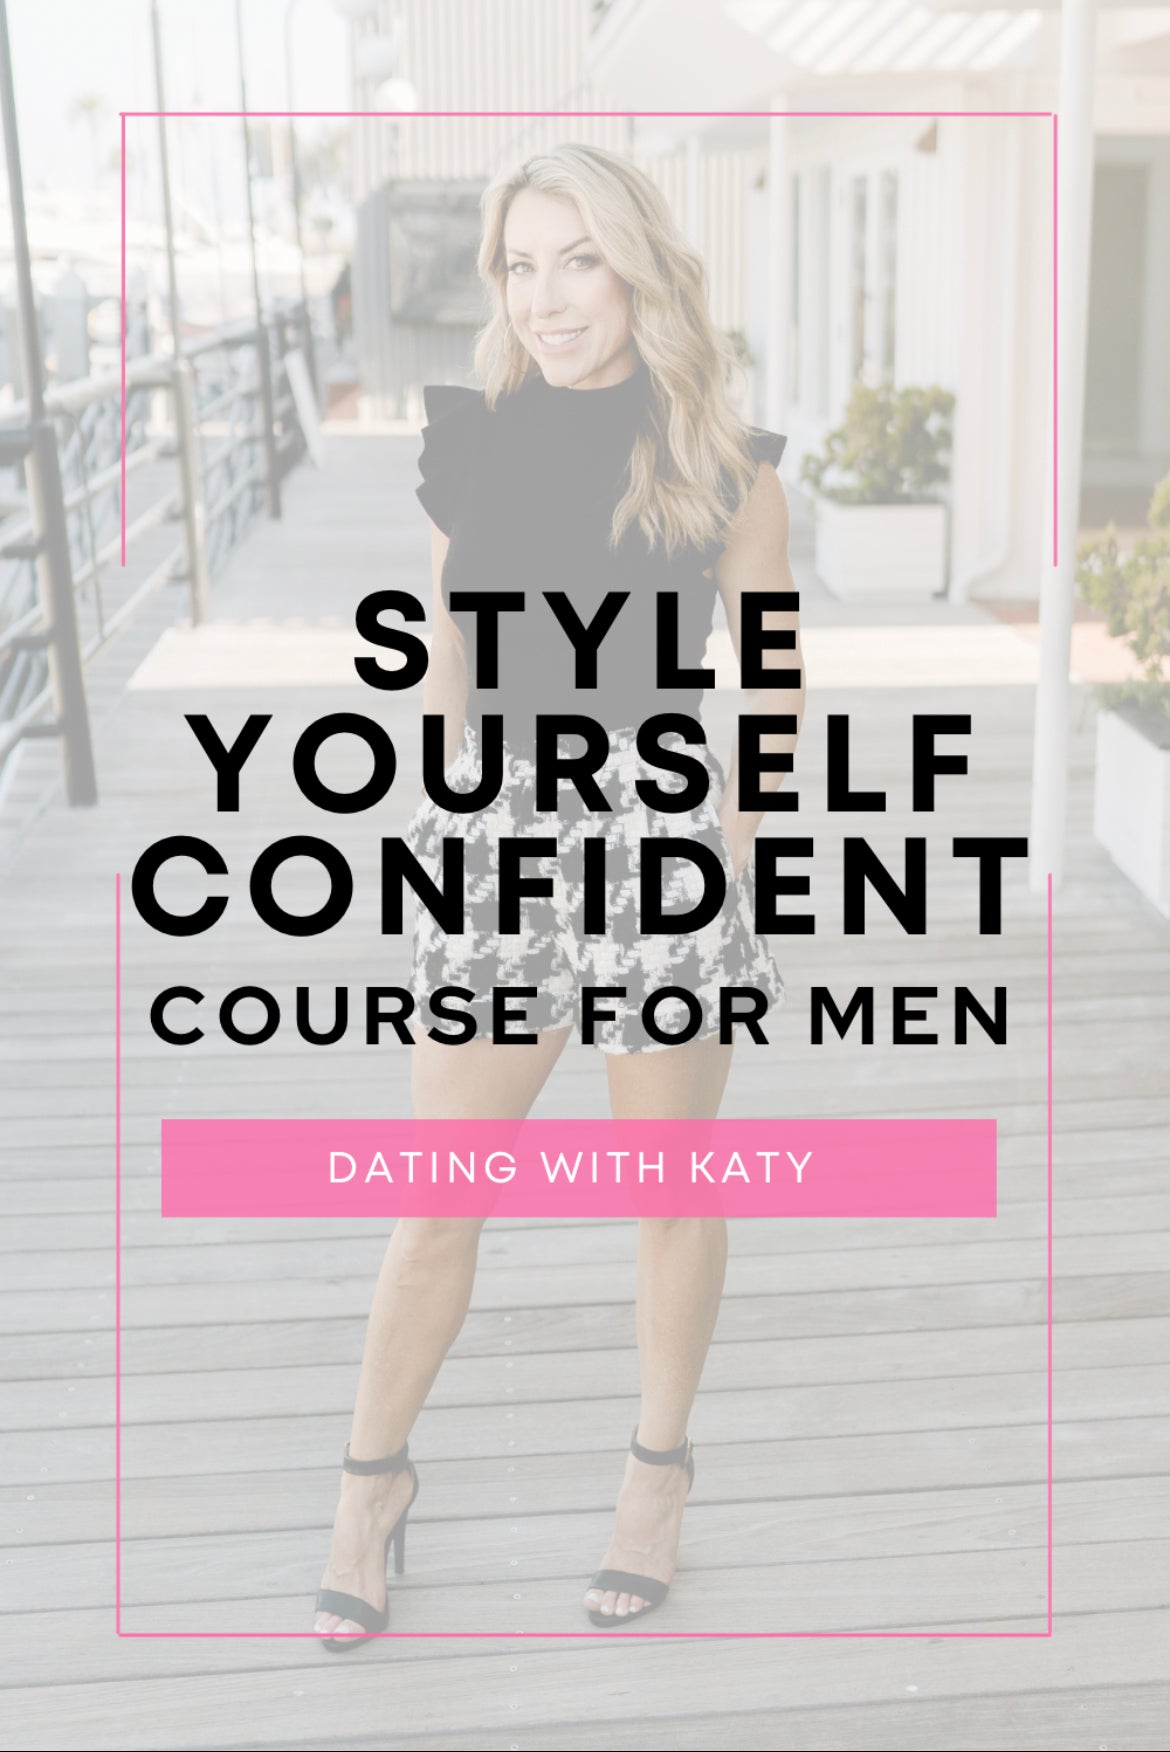 STYLE YOURSELF CONFIDENT - Video Course for Men